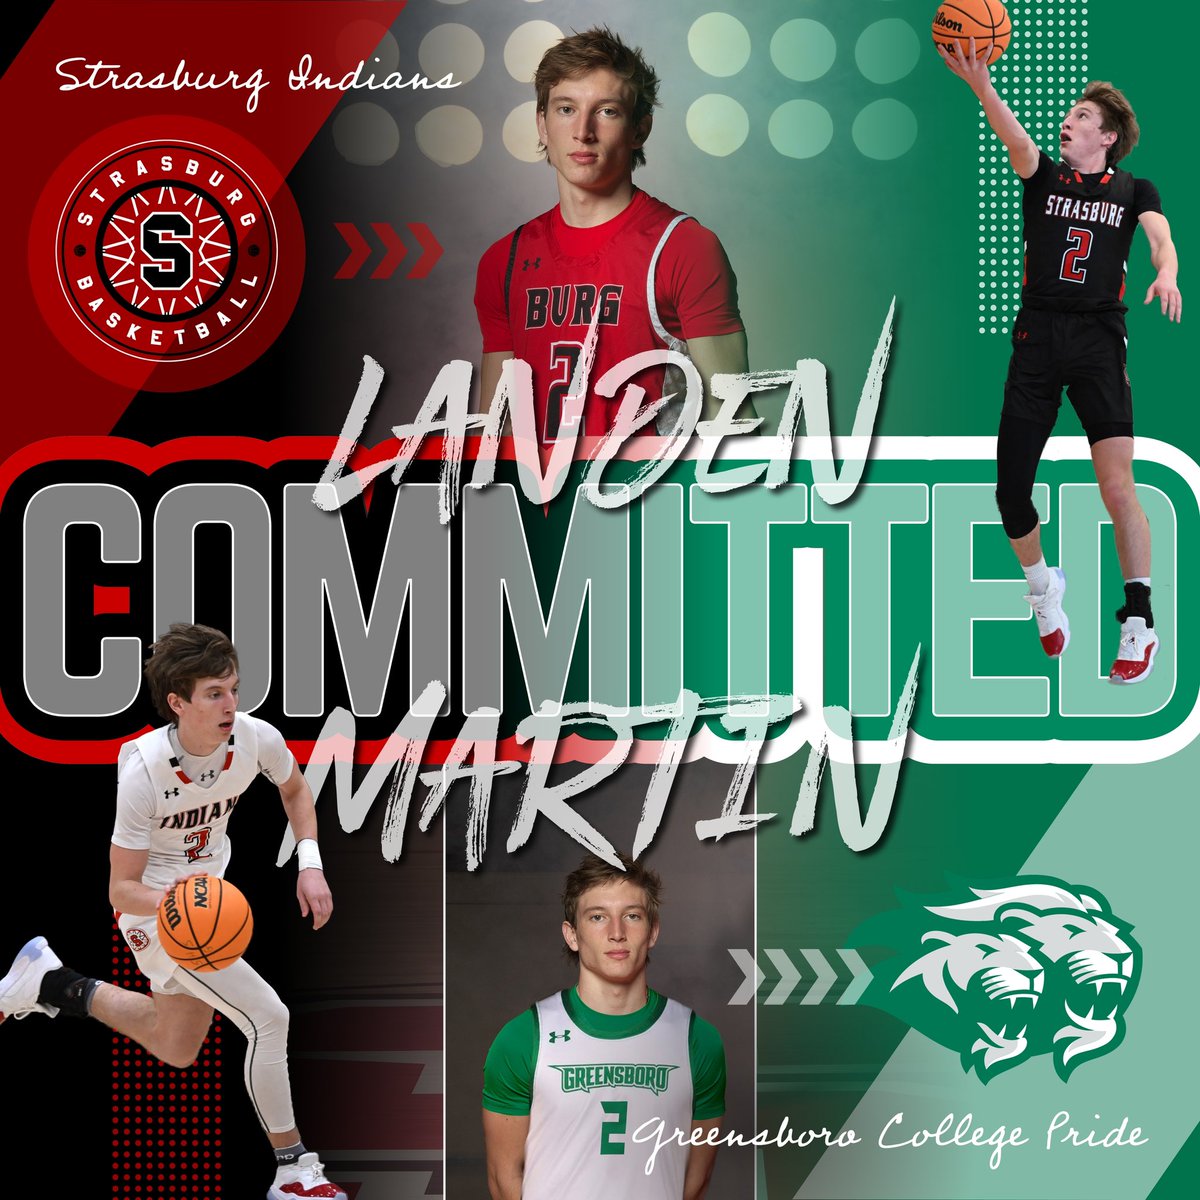 Huge congrats to our guy @landenmartin_2 for his commitment to @GCPride_MBBall! Very proud of everything this young man has accomplished and what is still to come. Big things ahead! #BurgHoops